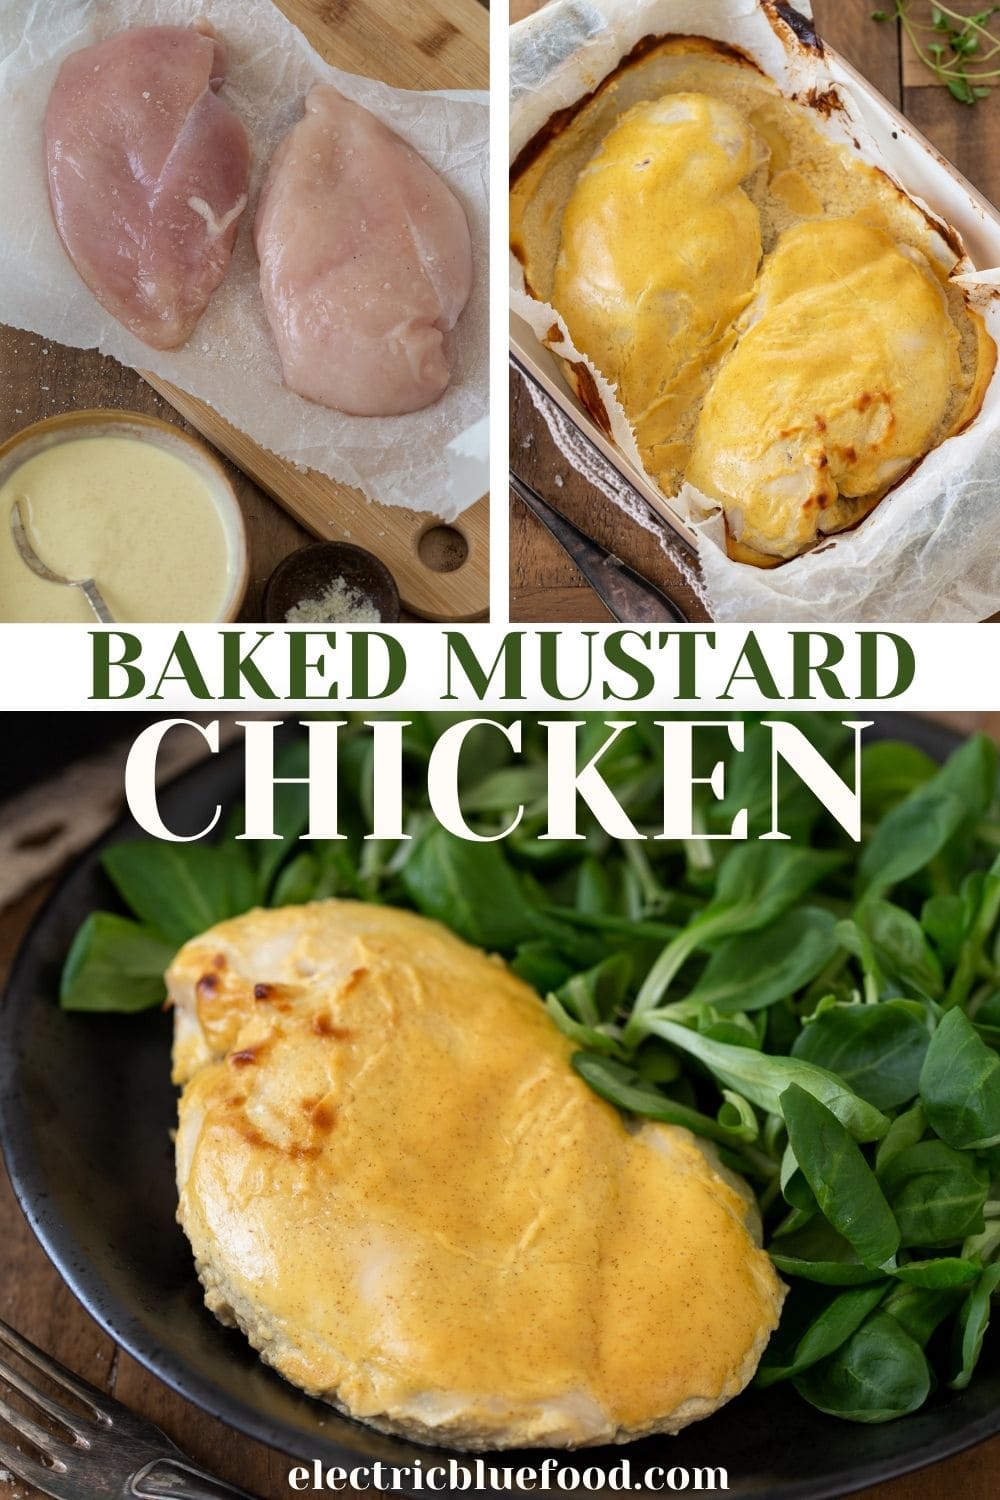 Easy baked mustard chicken breasts are an easy midweek dinner that requires only 2 minutes hand-on and just over a half hour of oven time.